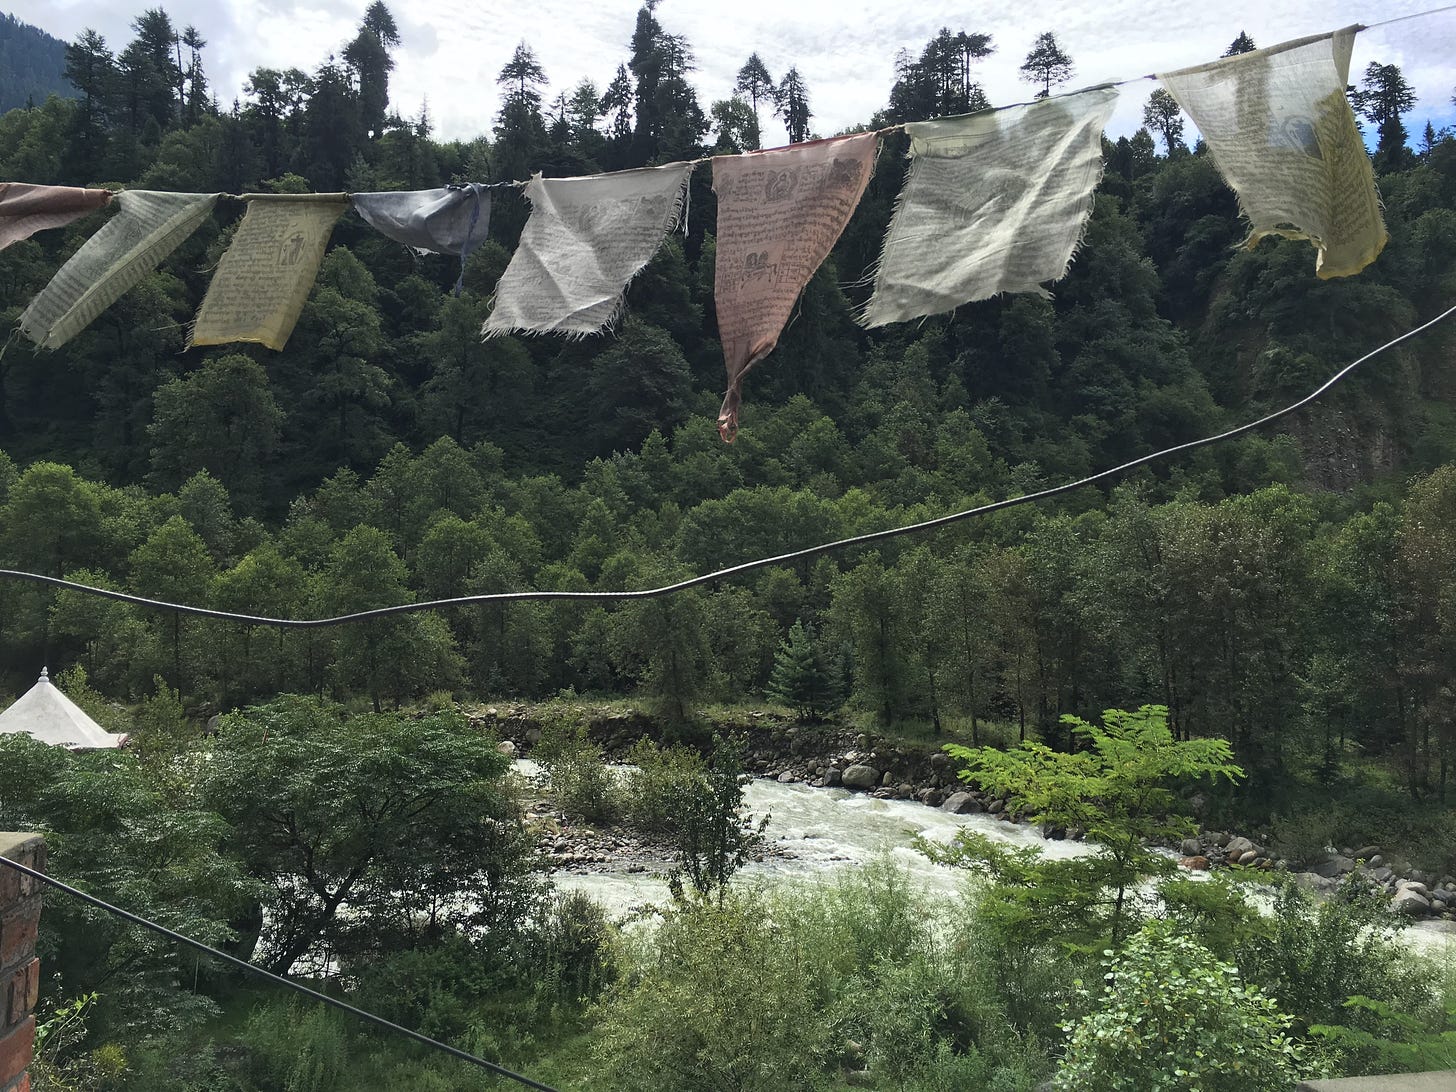 A string of prayer flags in red, white, blue, green, and yellow, hang above black wires. Behind them is a river, with various types of trees growing in the surrounding area.